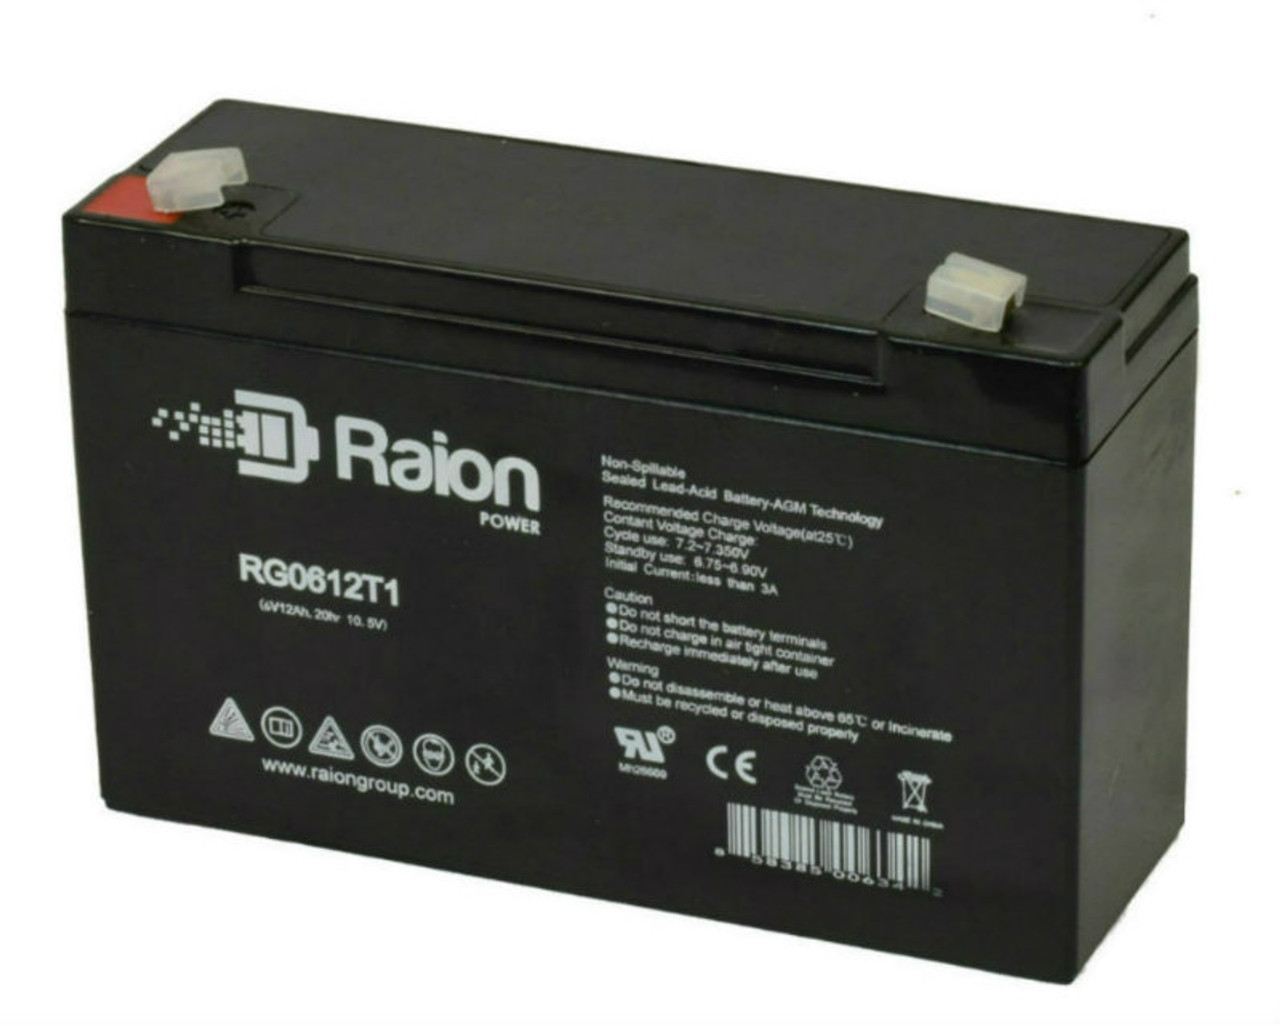 Raion Power RG06120T1 Replacement Battery for Leoch DJW6-14